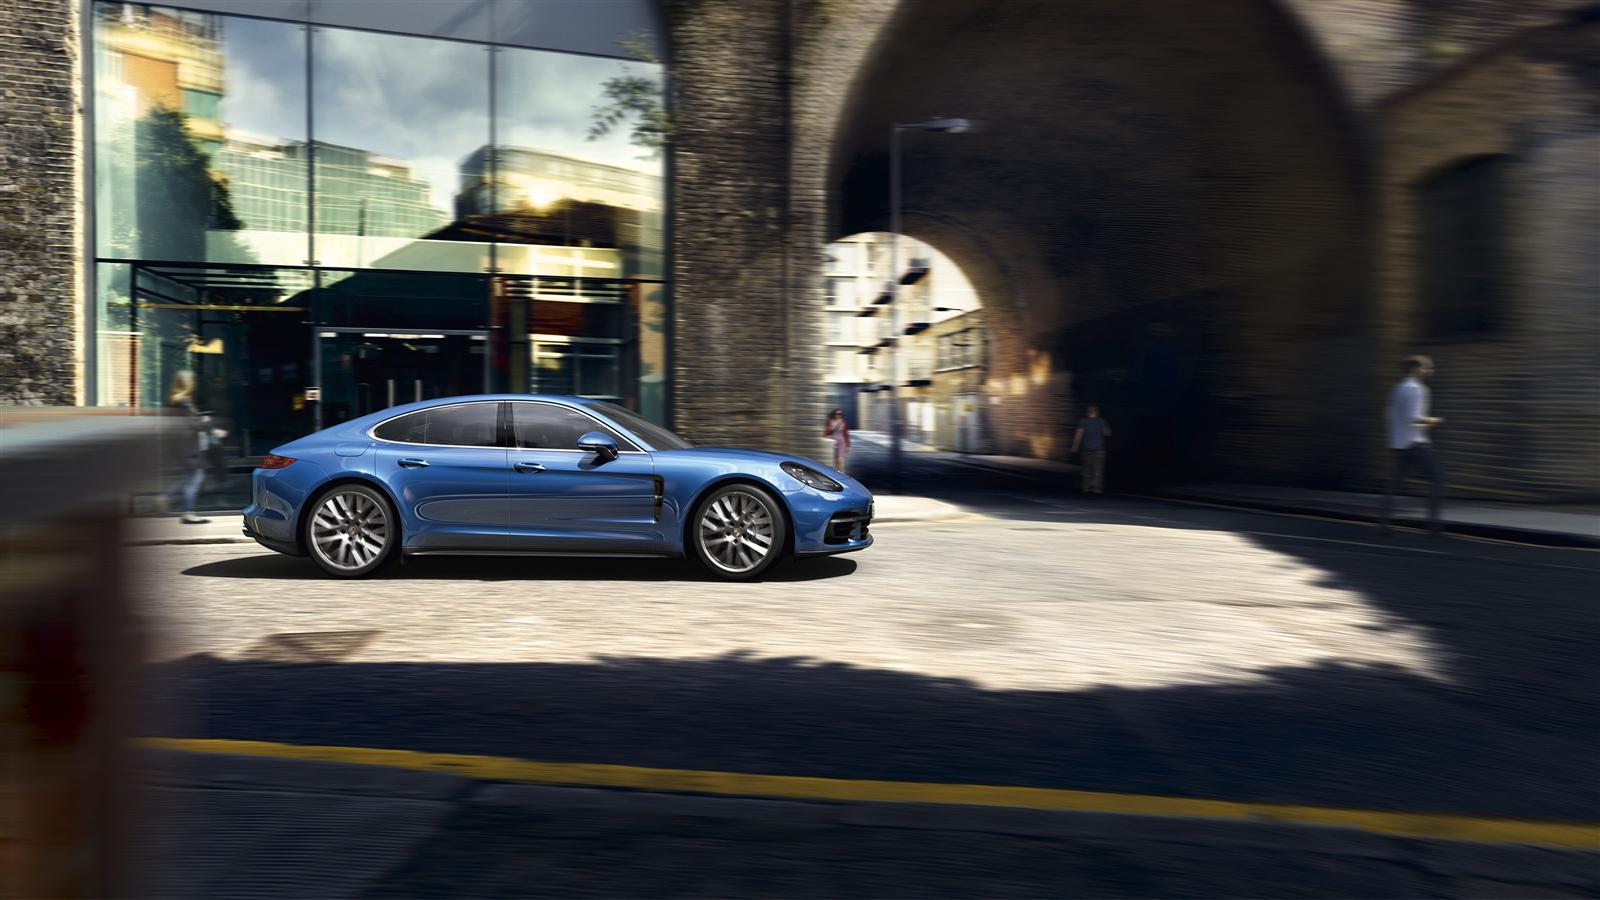 Porsche’s new Panamera Executive is a sporty saloon to be chauffeured in